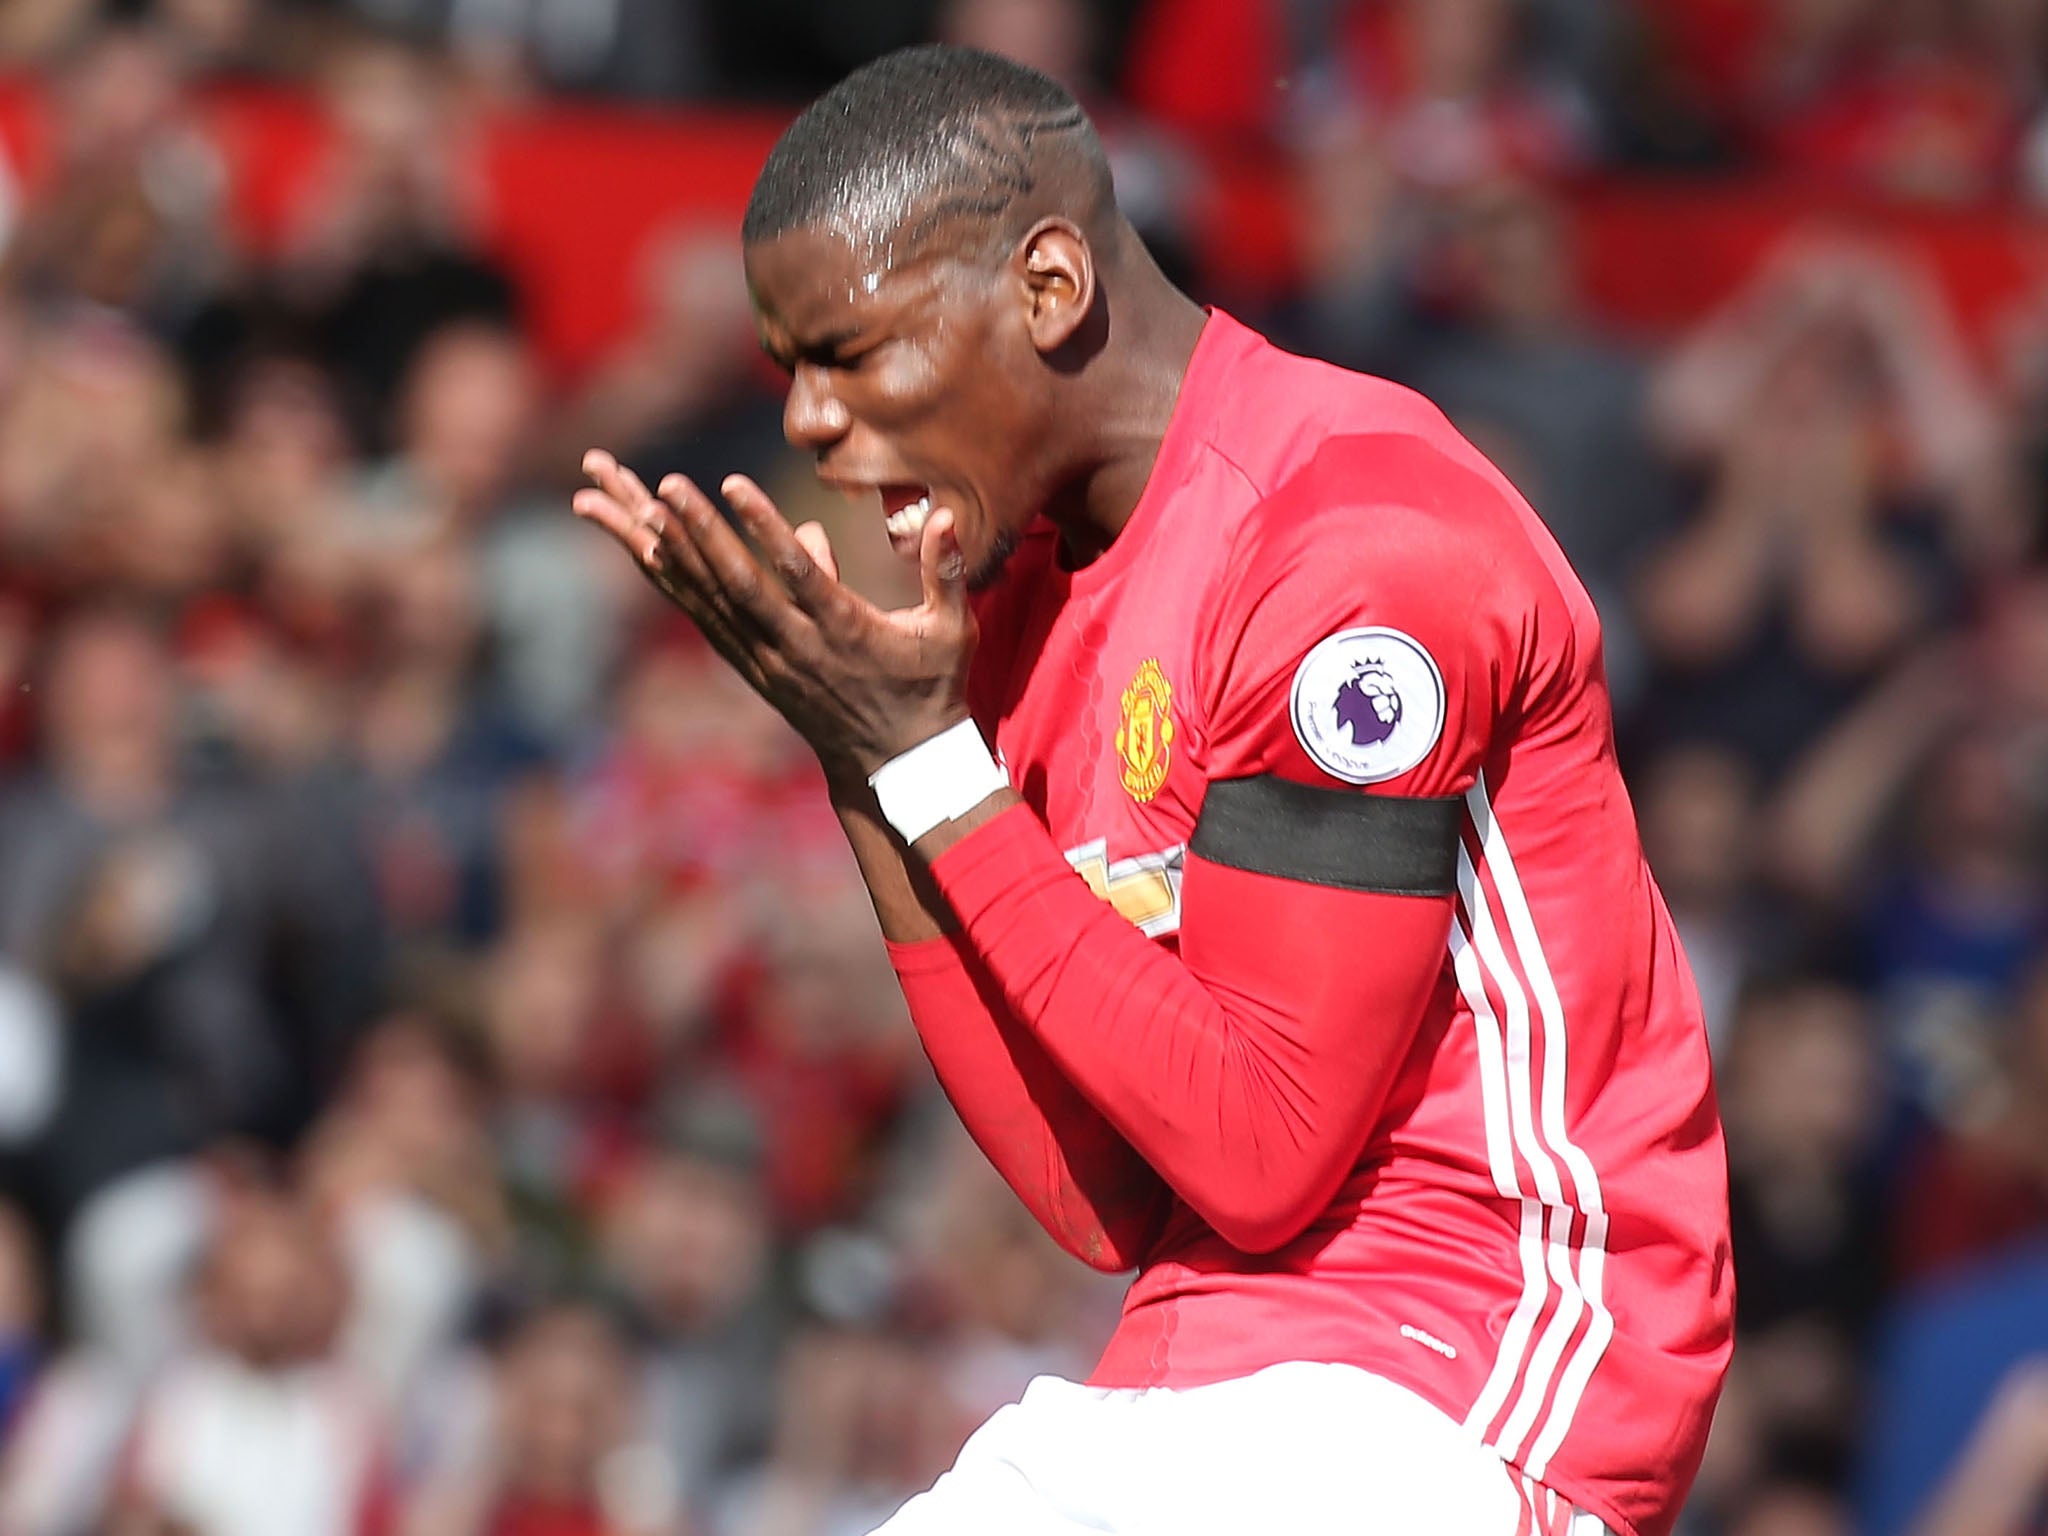 Paul Pogba was guilty of missing two clear chances